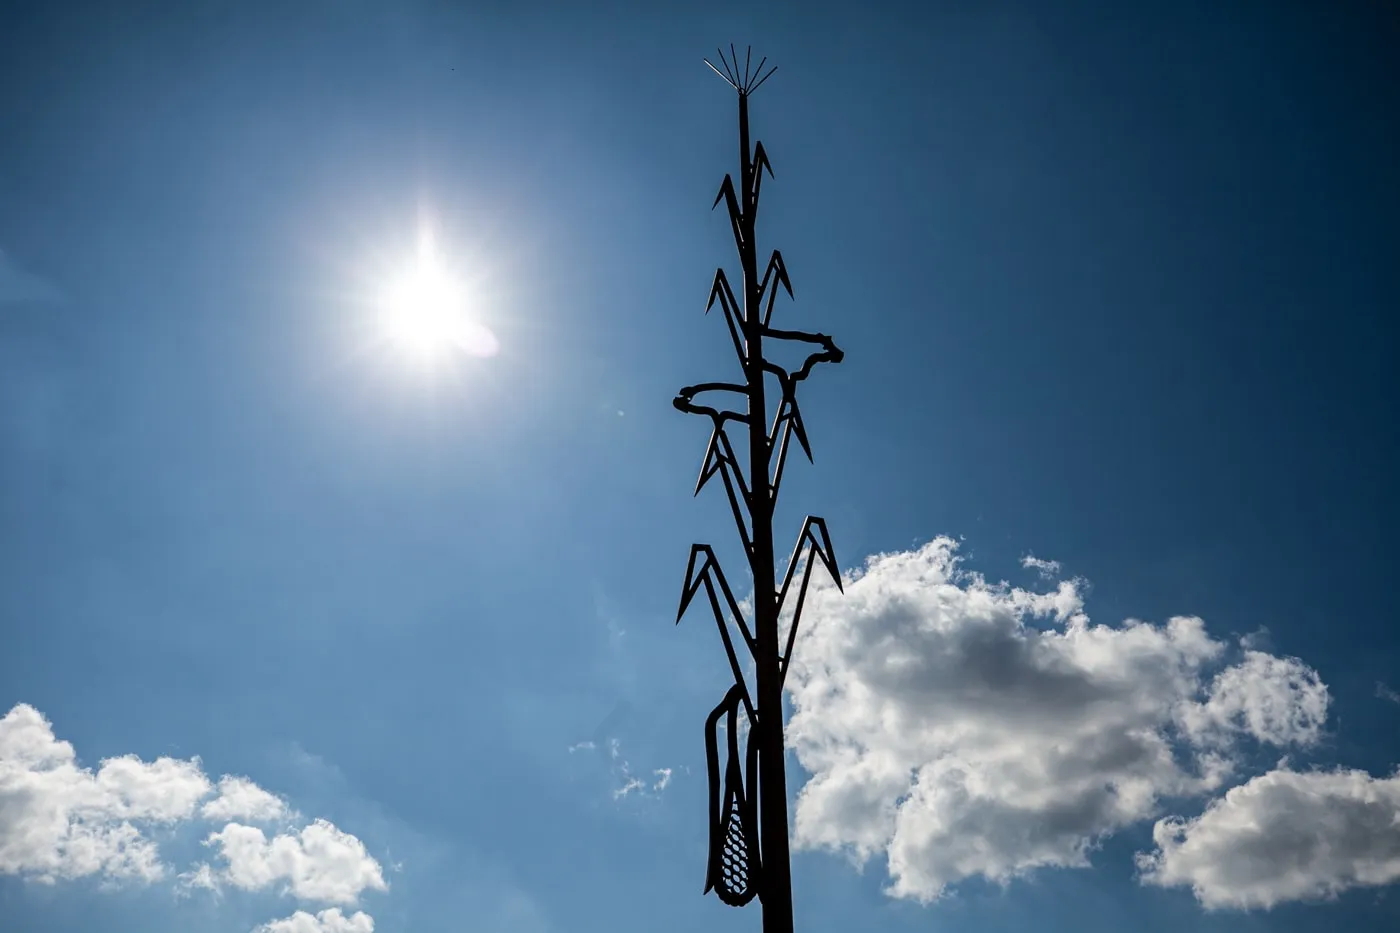 Agri-Symbol: The agricultural symbol is a 76-Foot-Tall Corn Stalk in Shelby, Iowa | Iowa Roadside Attractions